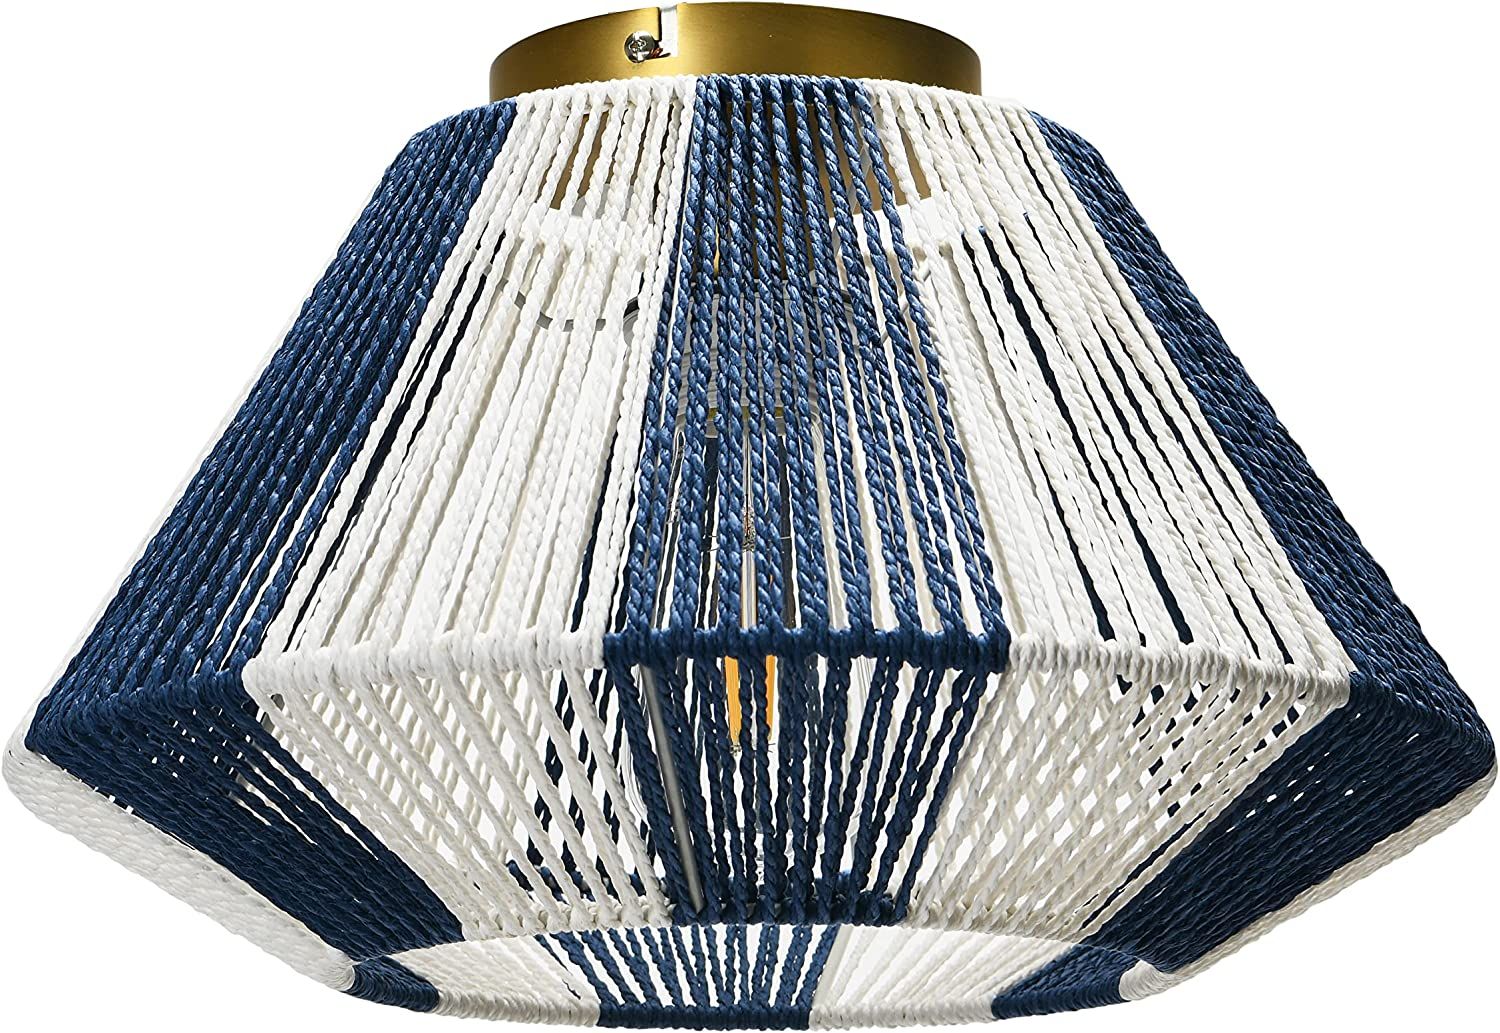 Creative Co-Op EC1262 Mount Ceiling Woven Paper Rope Shade, Navy and White Semi-Flush Light | Amazon (US)